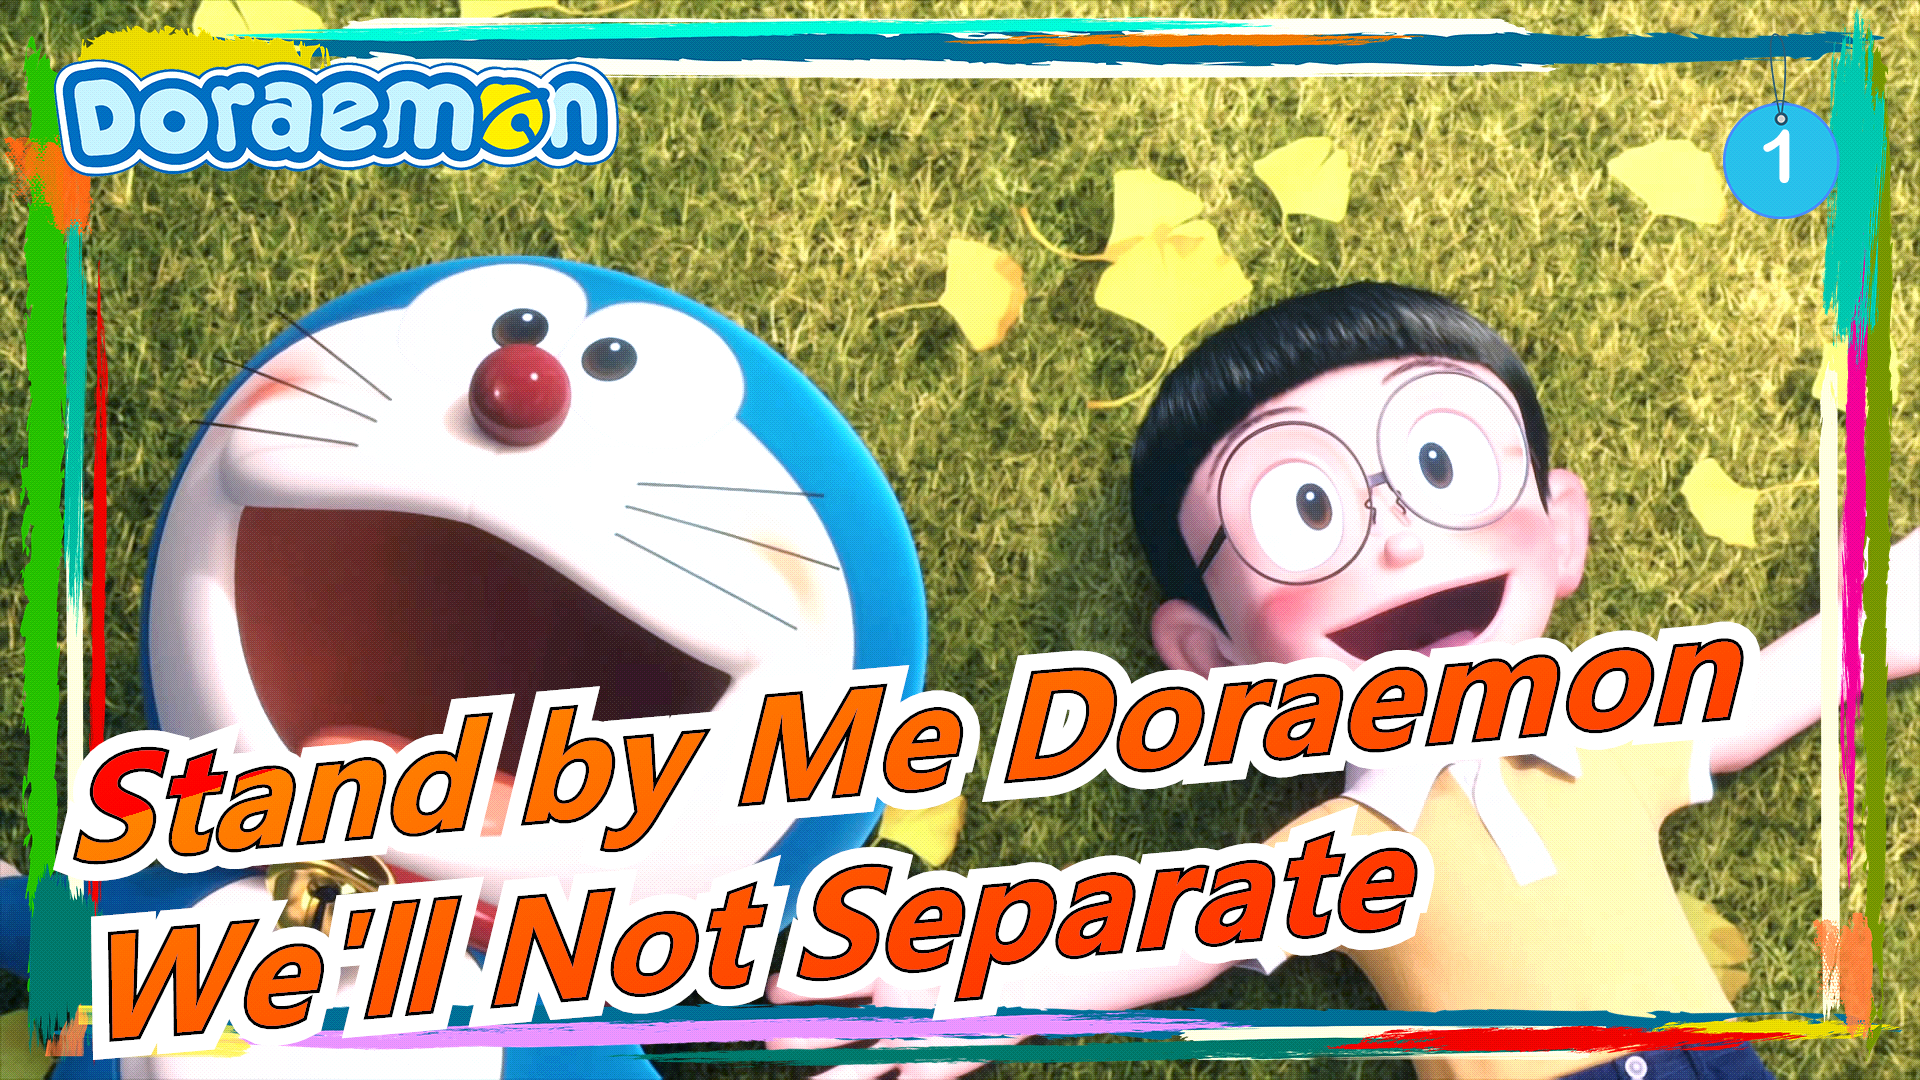 Stand by Me Doraemon] We'll Not Separate, Doramon!_1 - Bilibili